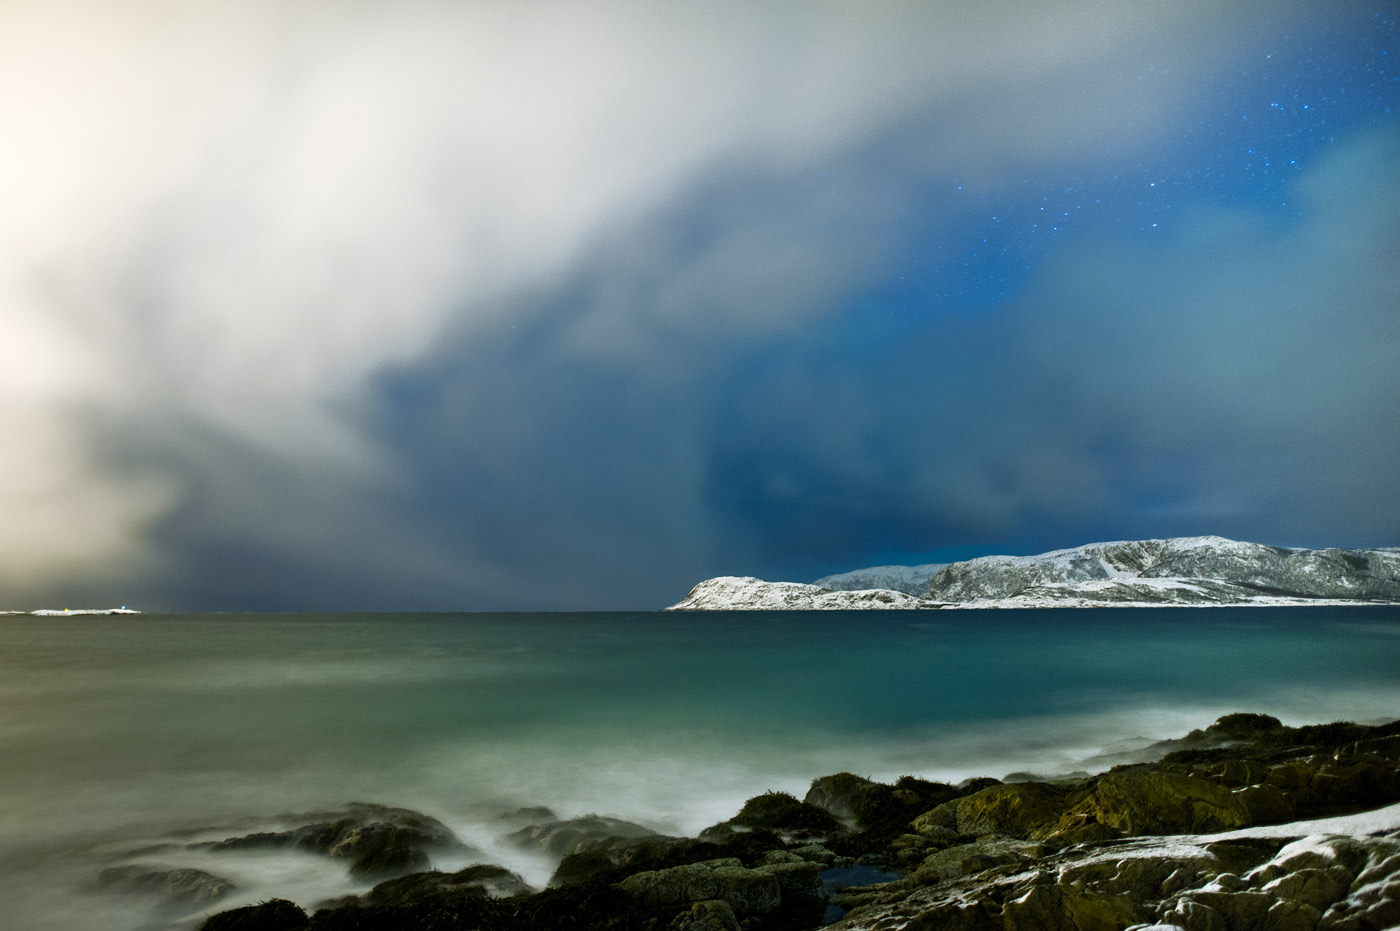 Snowstorm mixing up with Aurora Sunstorm, Sommarøy, 2012